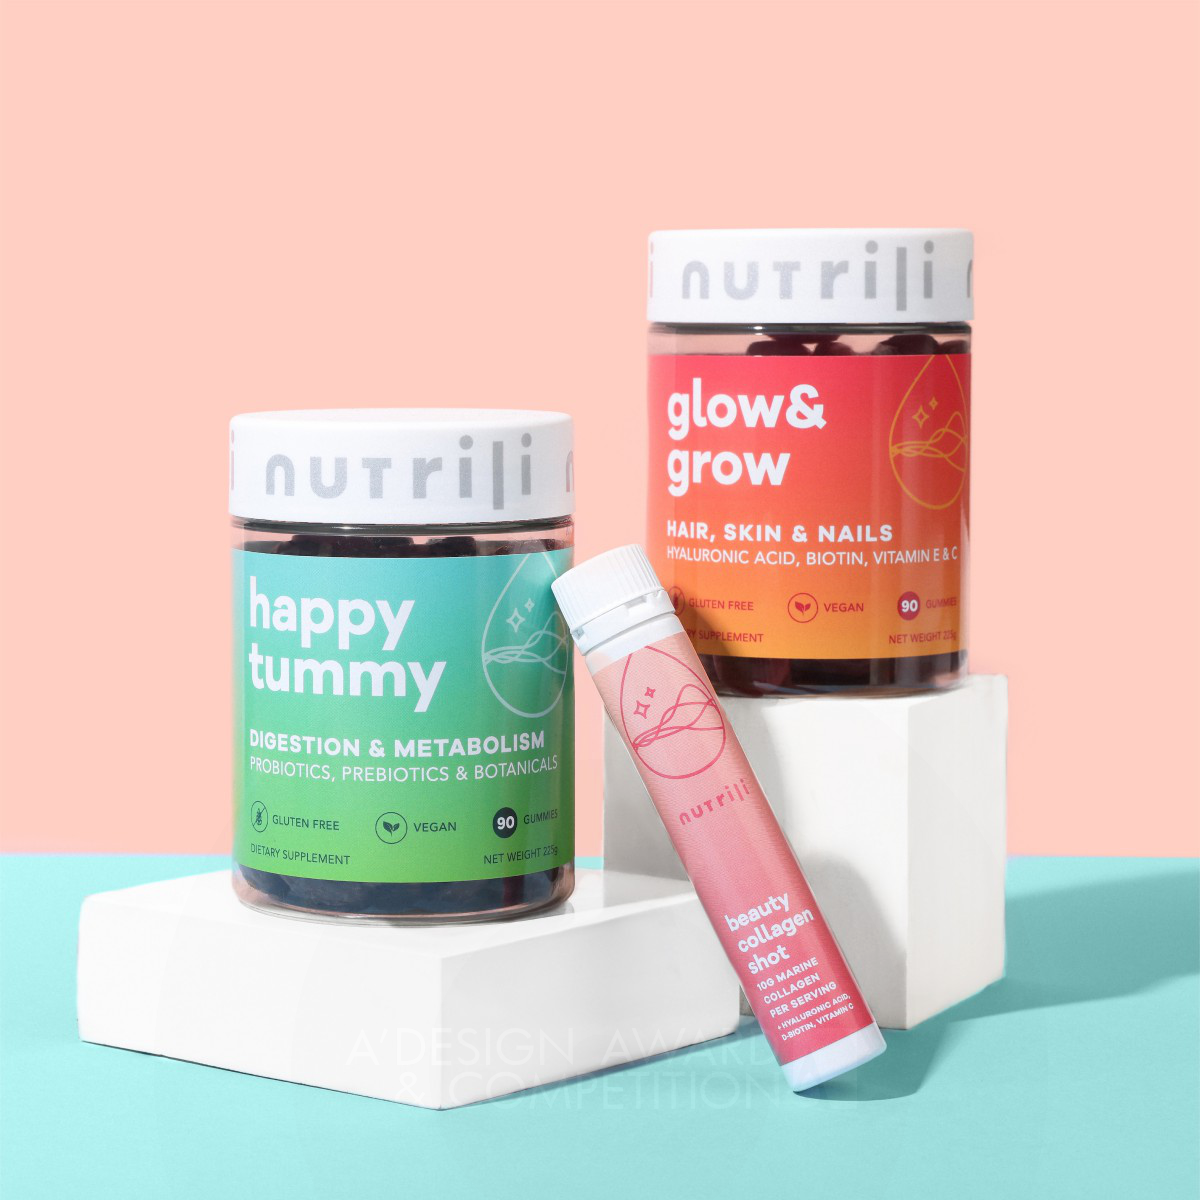 Nutrili Supplements Branding: Clean, Effective, and Attractive